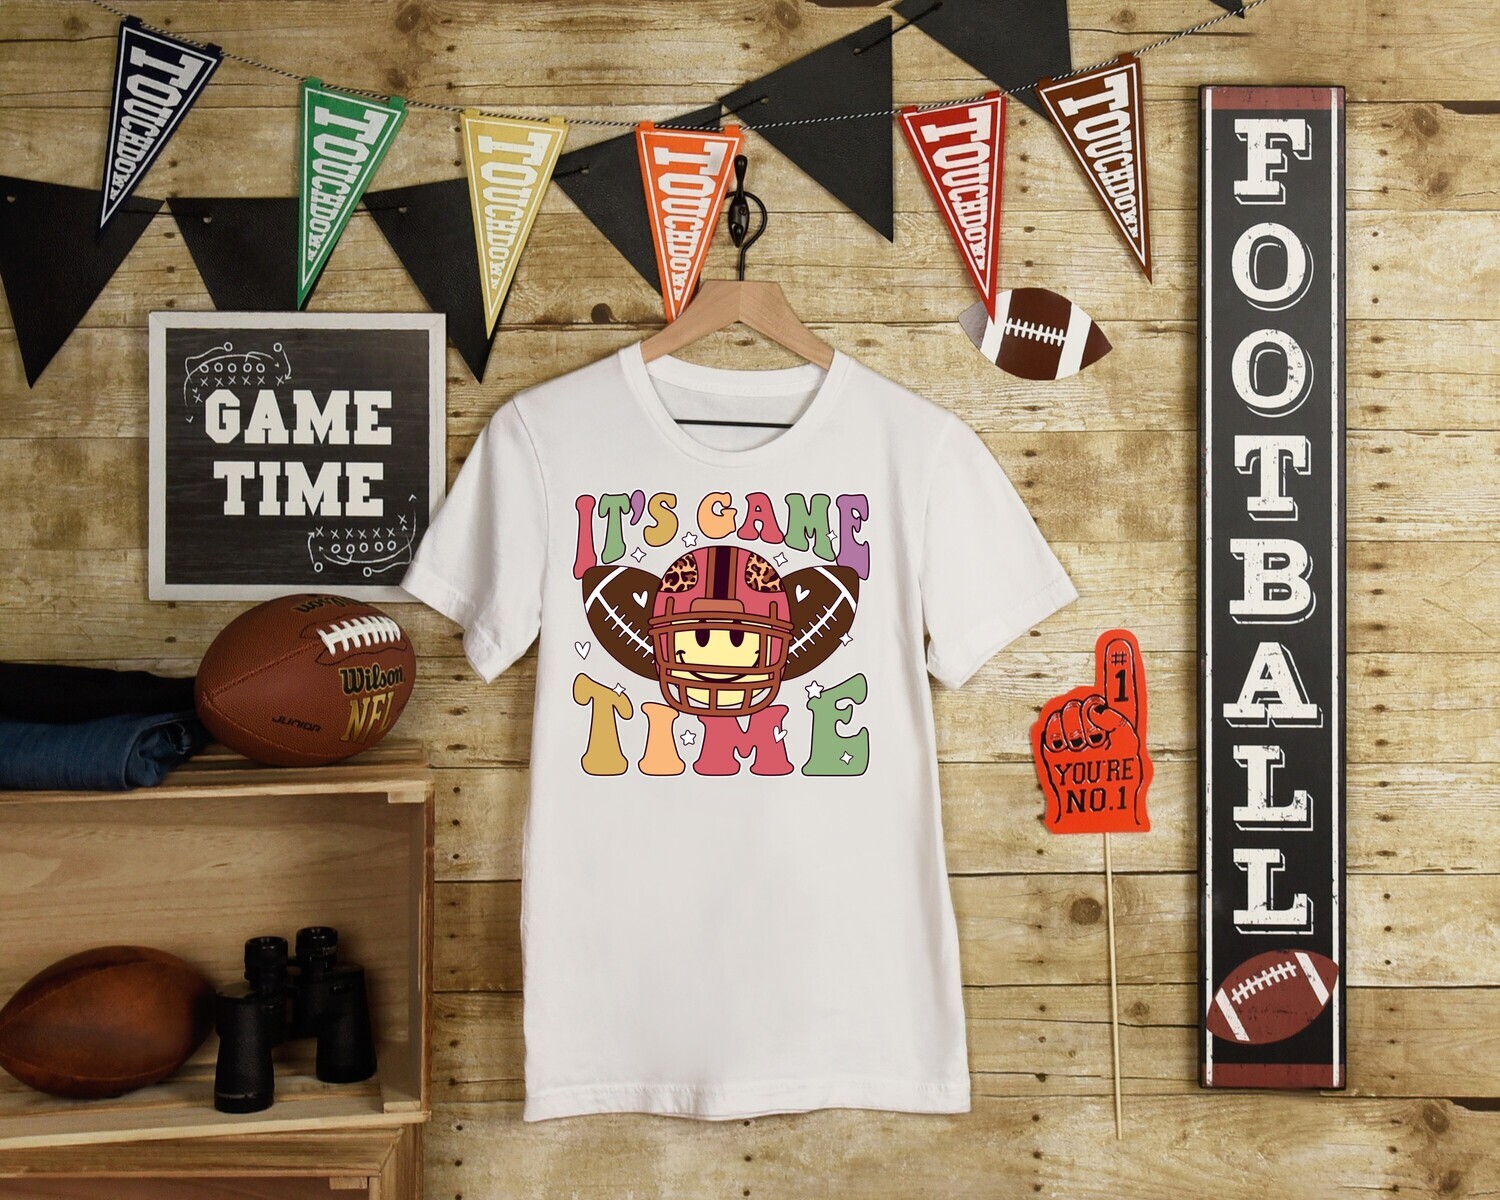 It's Game Time T-shirt